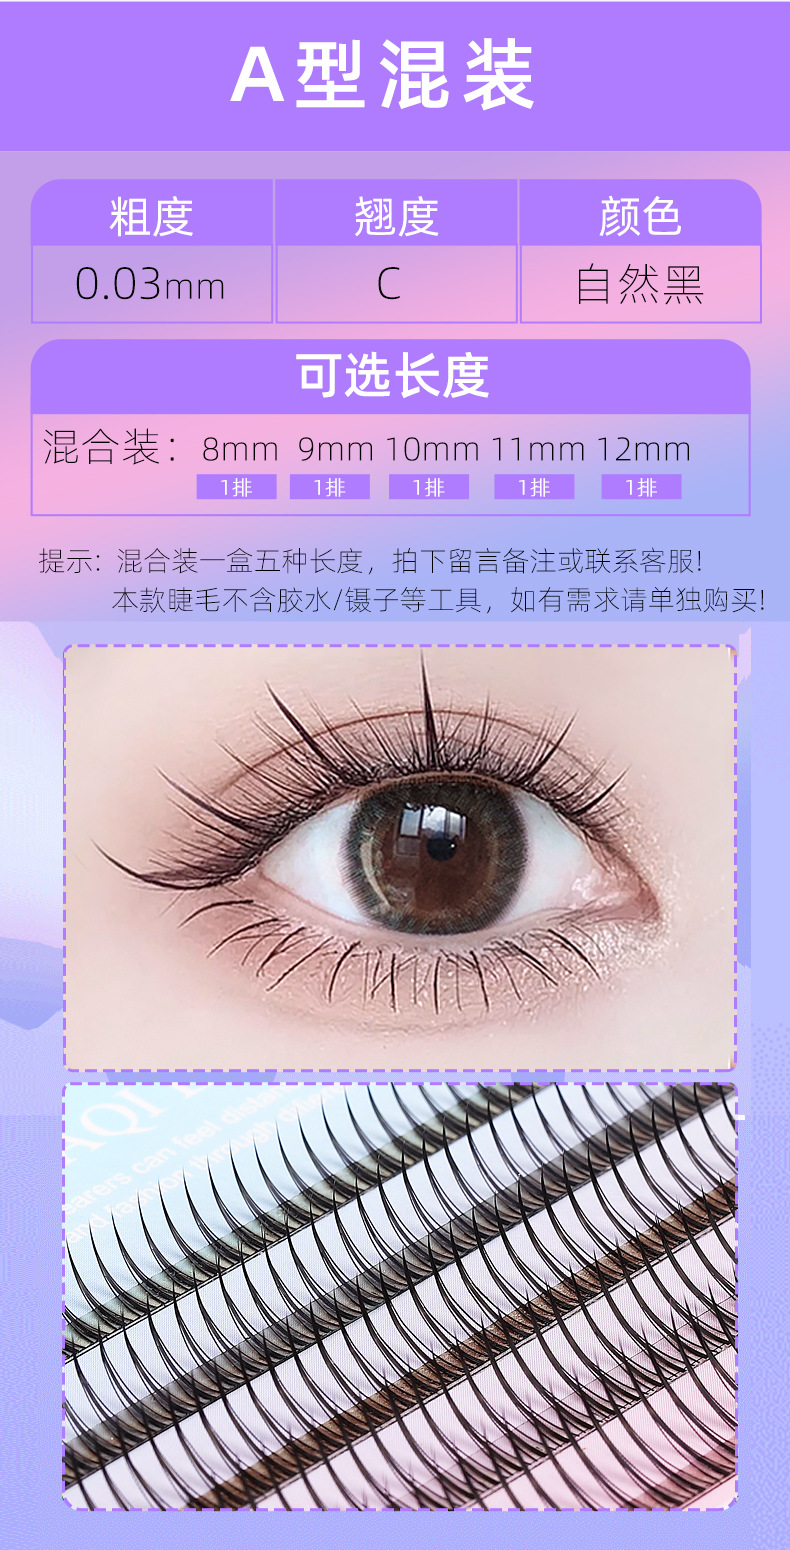 Fashion Sandwich Flower Fairy Flower Mix Five Rows Of Mixed Natural False Eyelashes